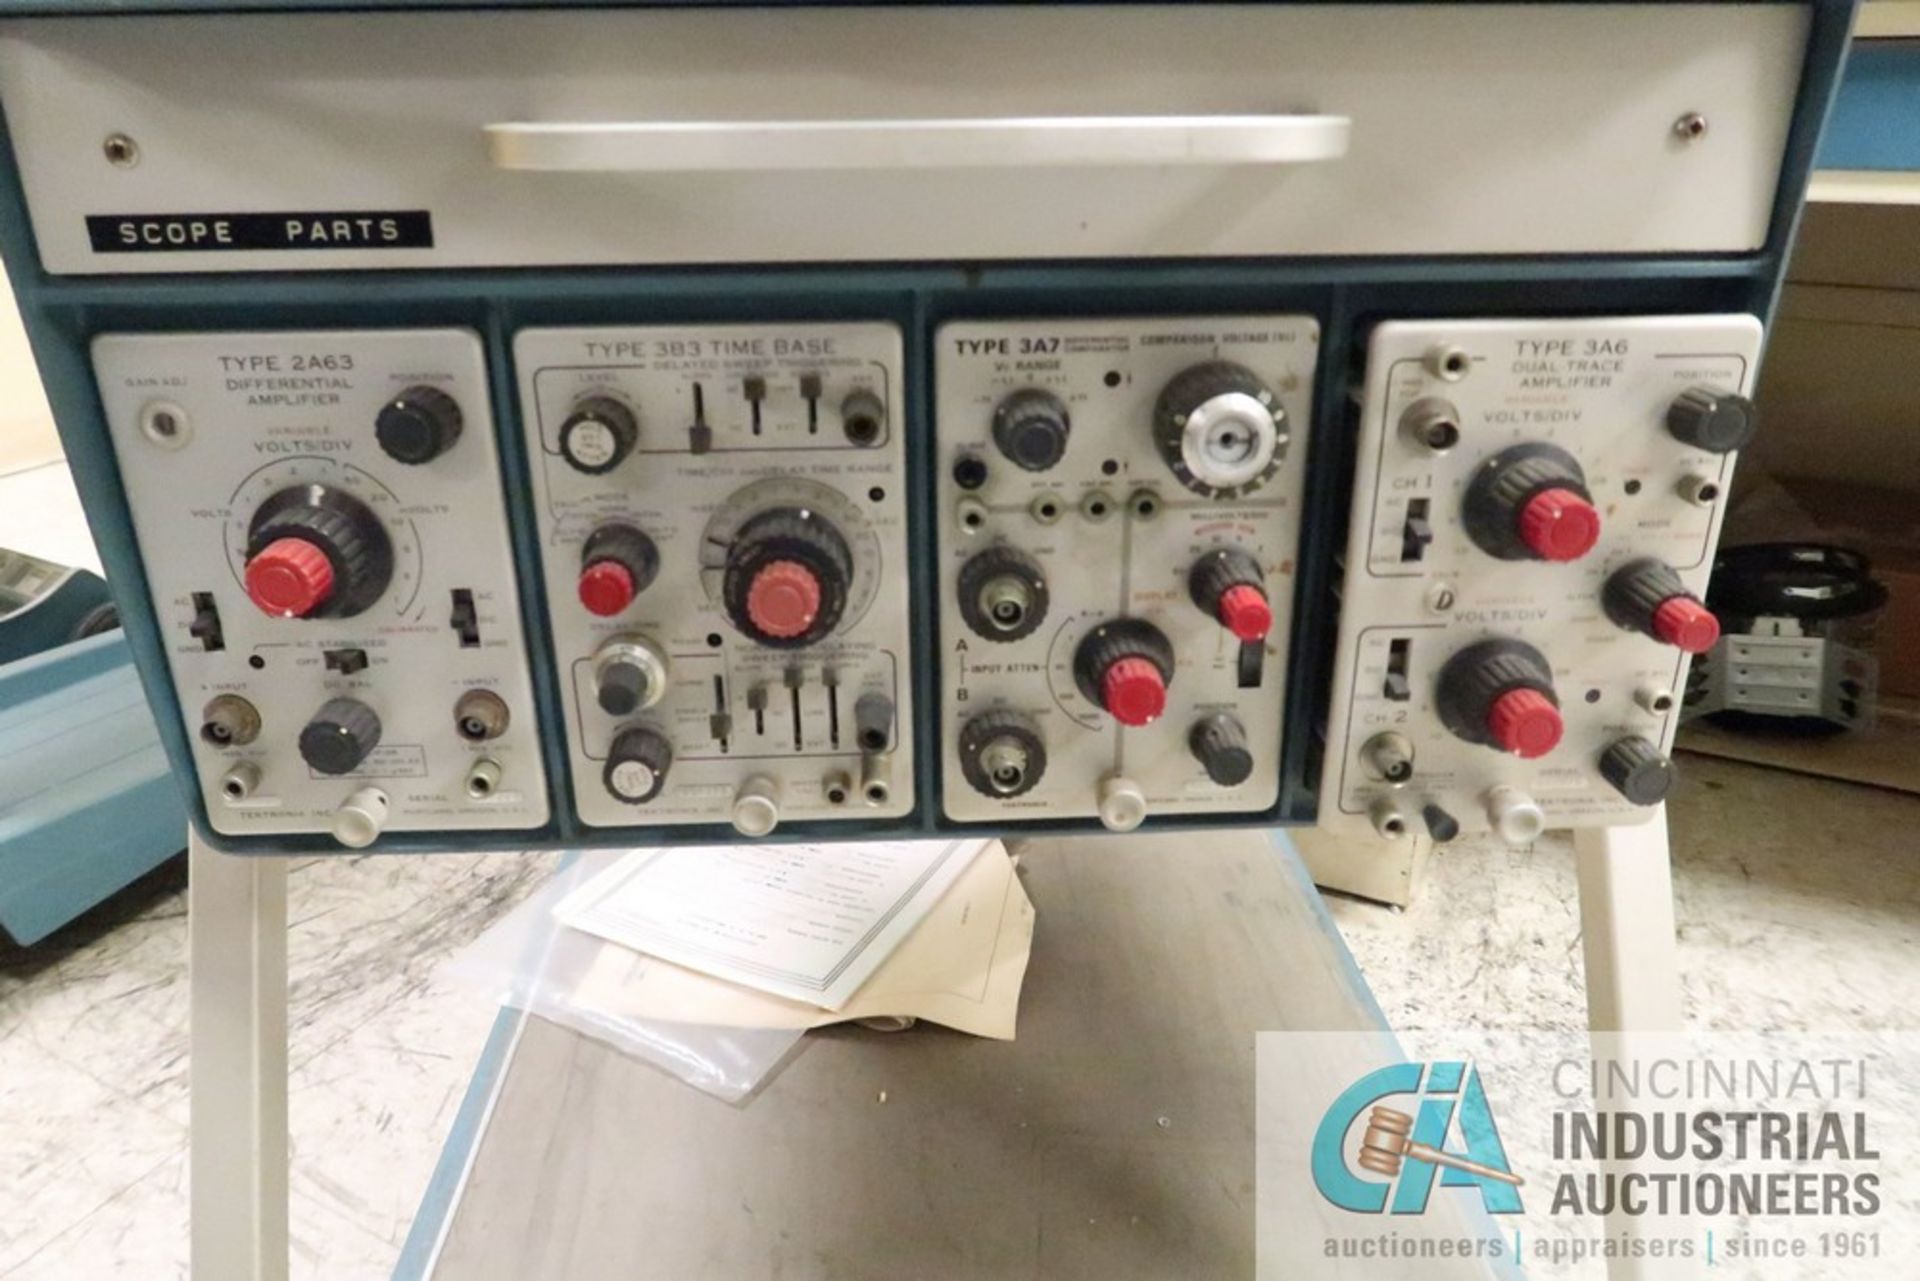 TEKTRONIX MODEL TDS-754D FOUR-CHANNEL OSCILLOSCOPE W/ TYPE 2A63 AMPLIFIER, 3B3 TIME BASE, TYPE 3AF - Image 4 of 4